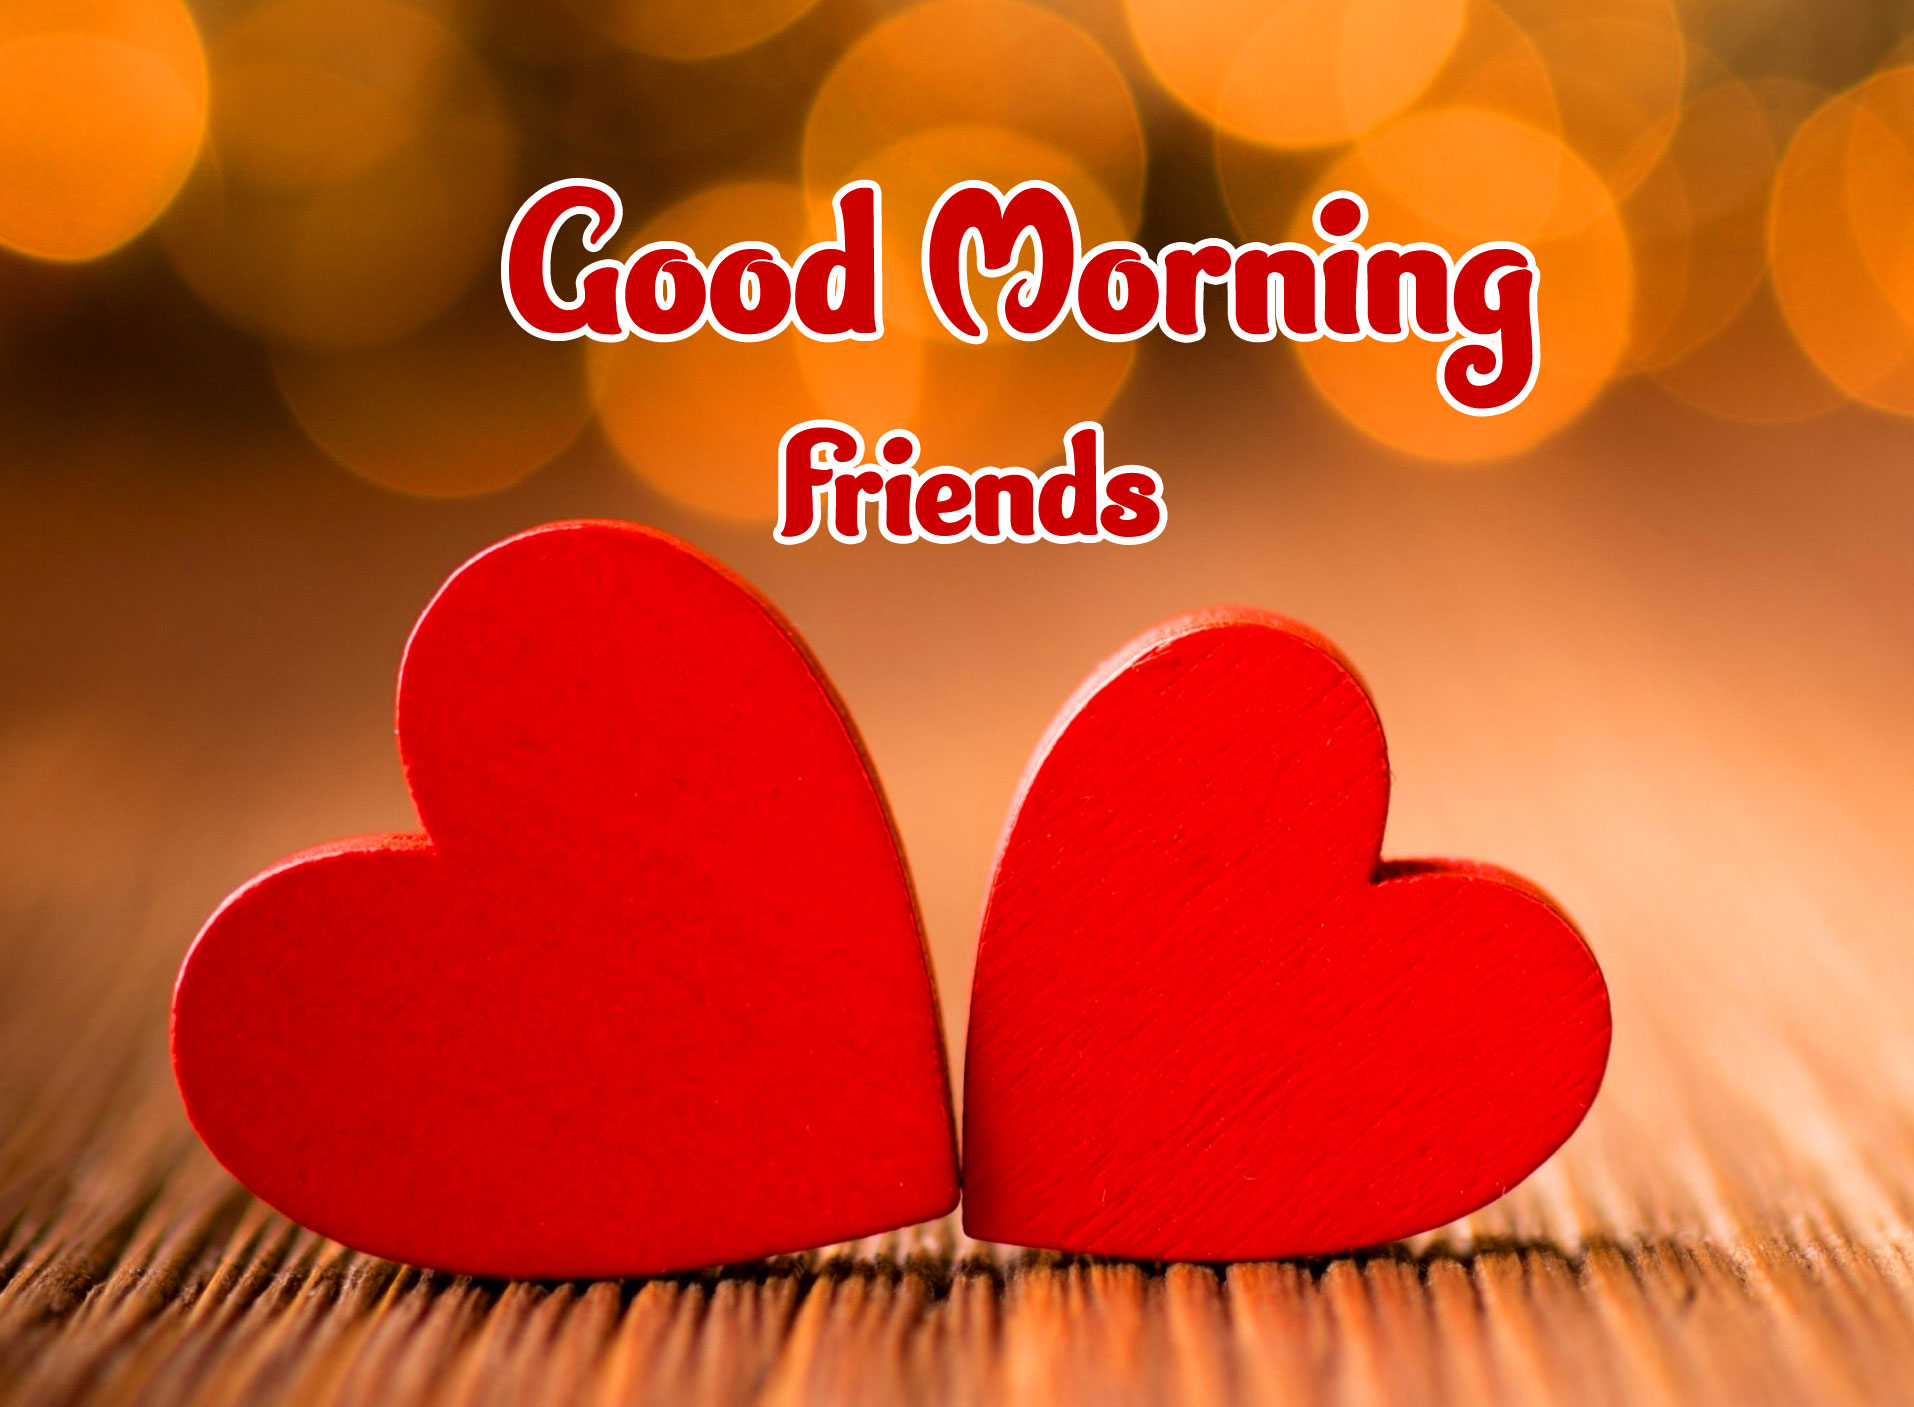 Good Morning Friends Images Wallpaper Pics free Download 